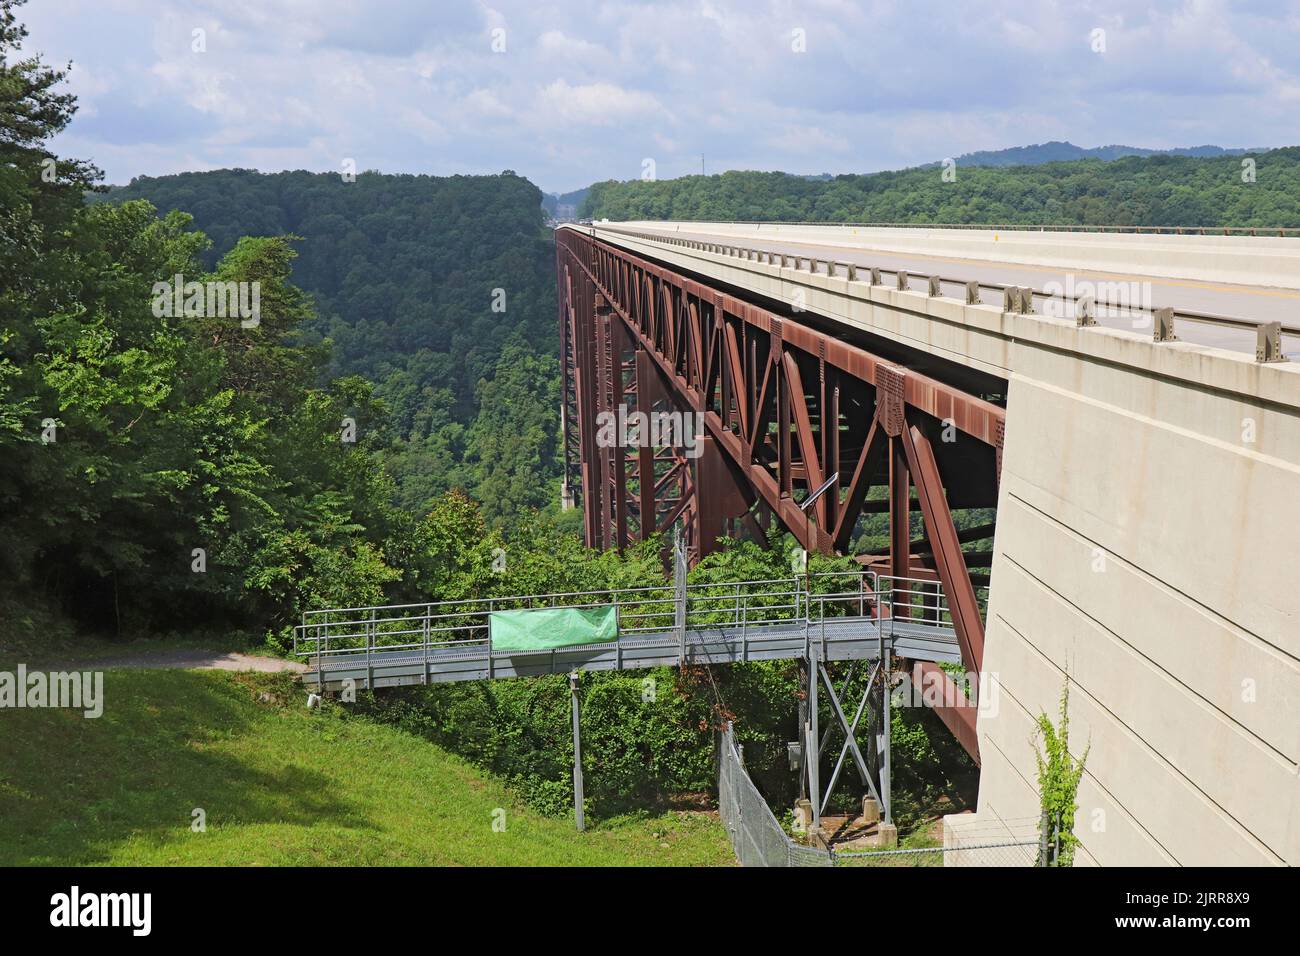 View of the New River Gorge Bridge on U.S. Route 19 near Fayetteville, West Virginia Stock Photo